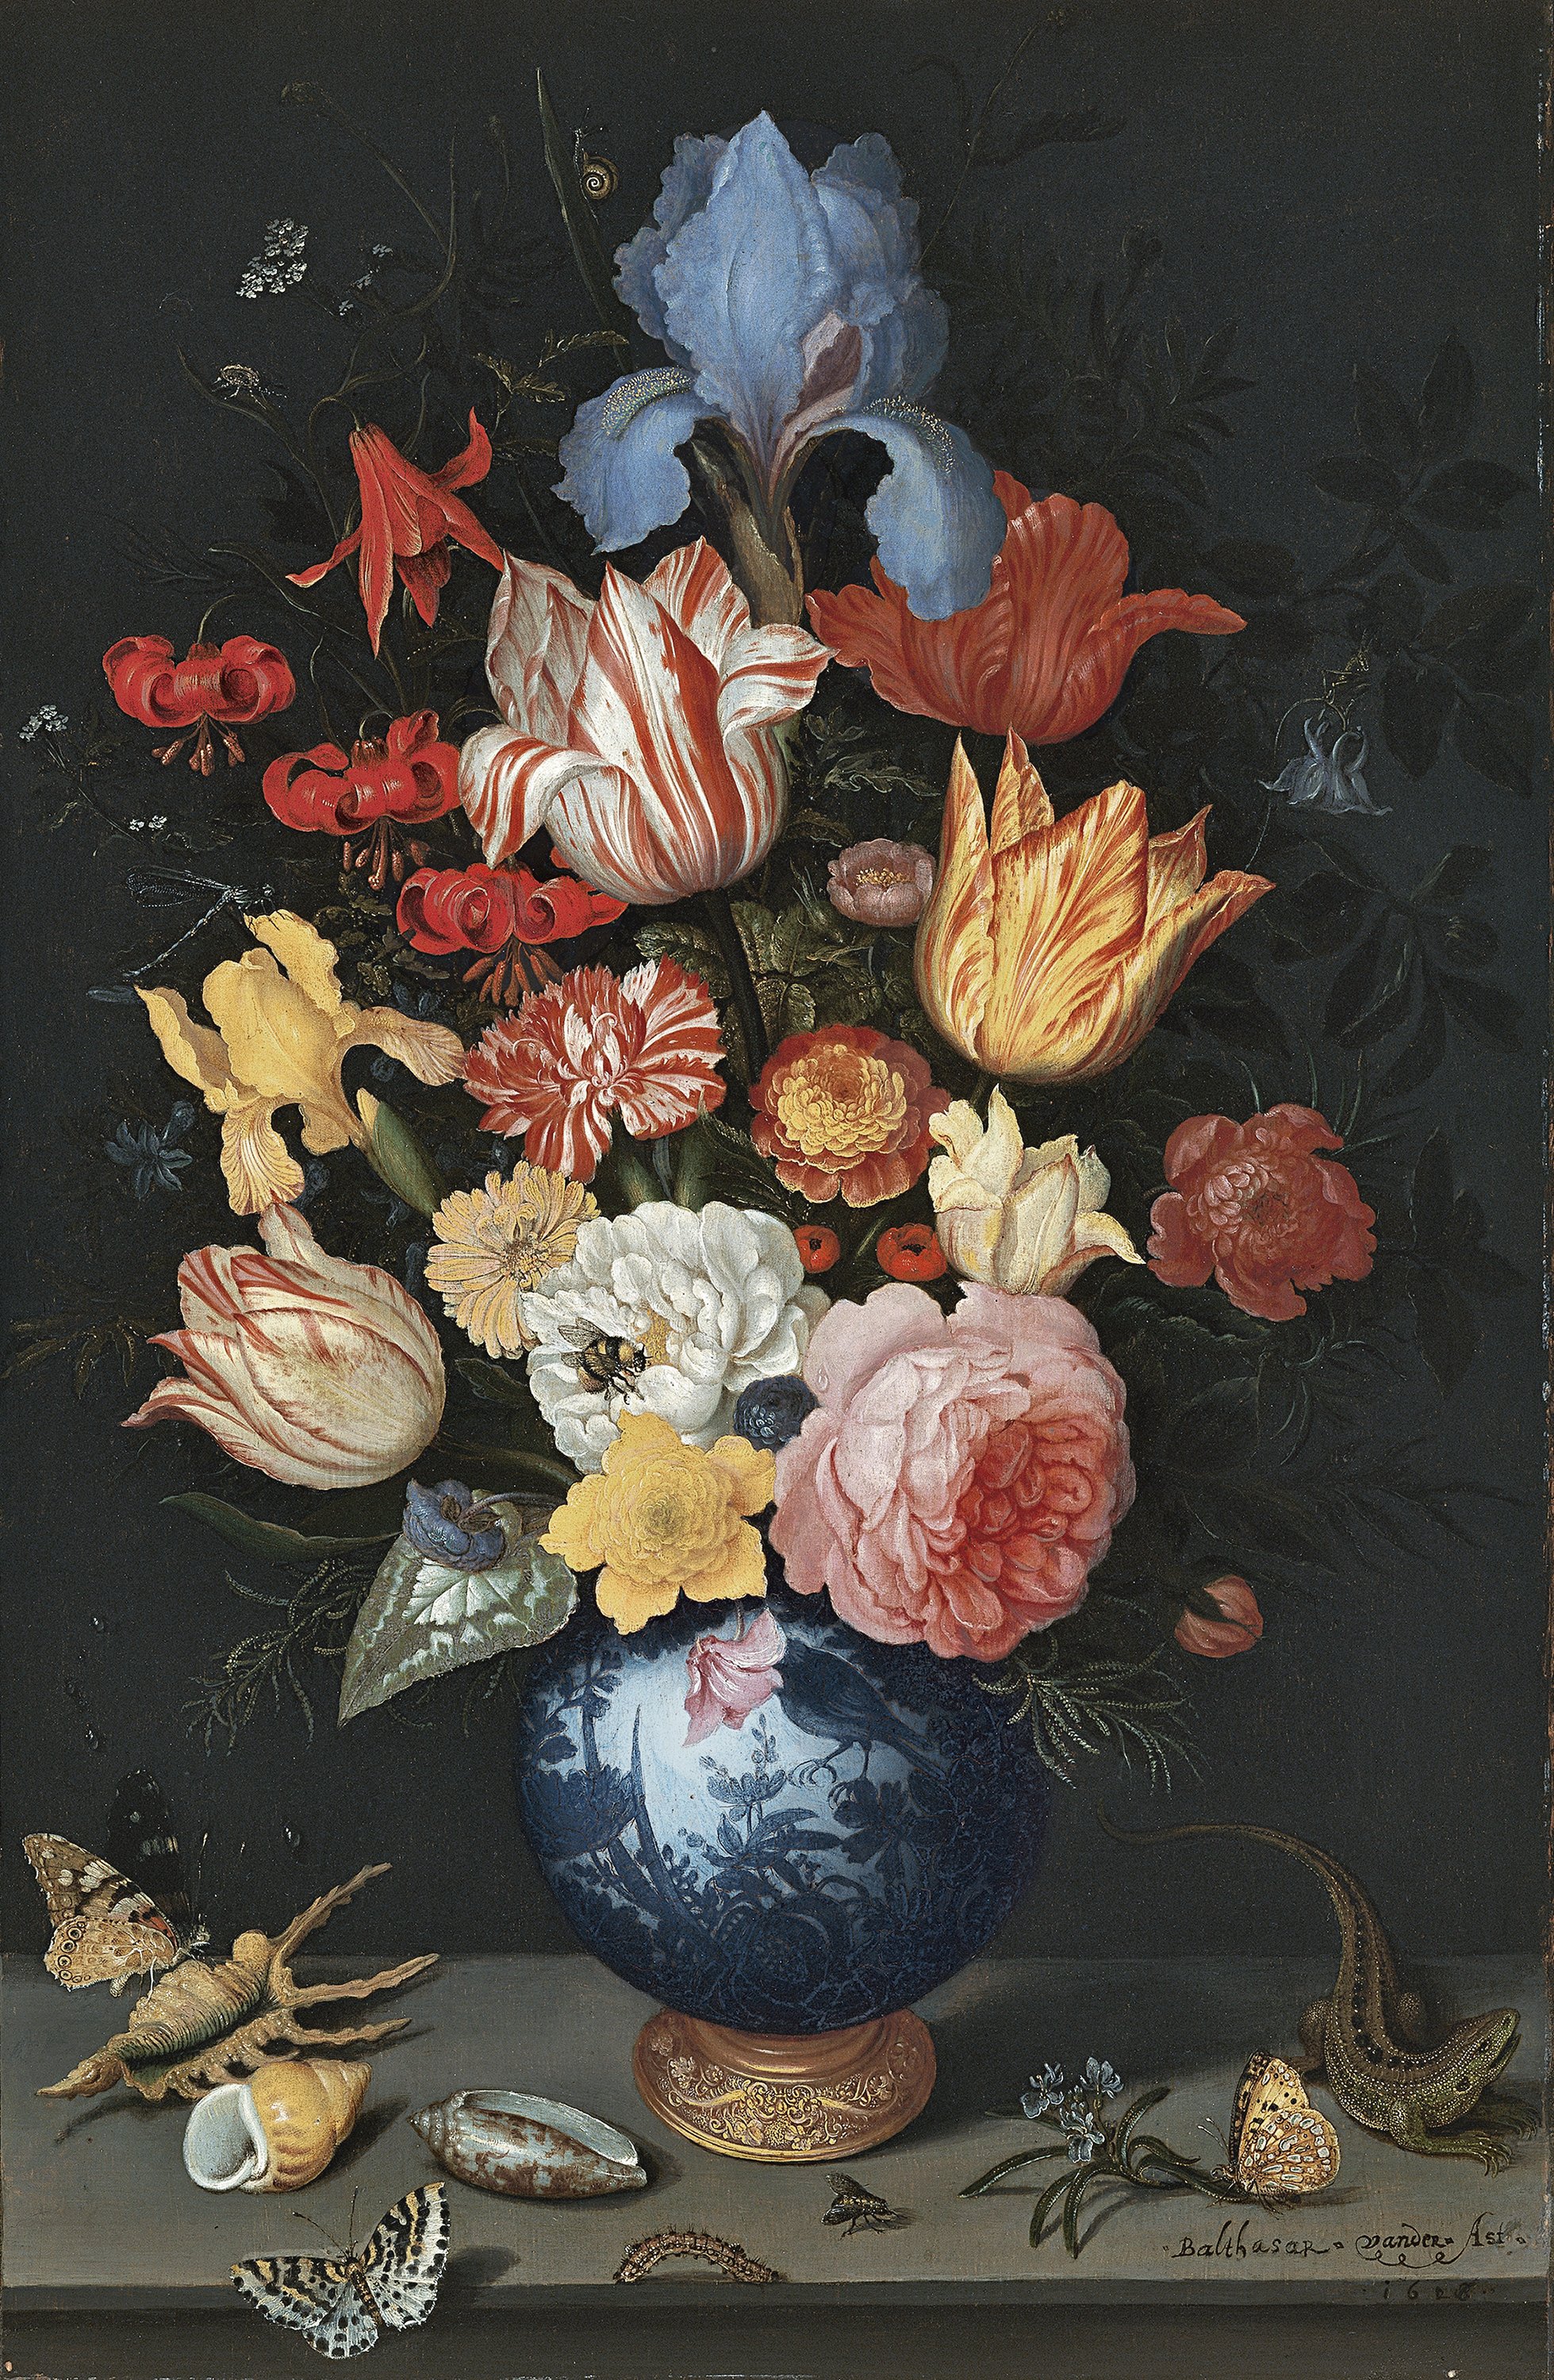 Chinese Vase with Flowers, Shells and Insects. Vaso chino con flores, conchas e insectos, 1628